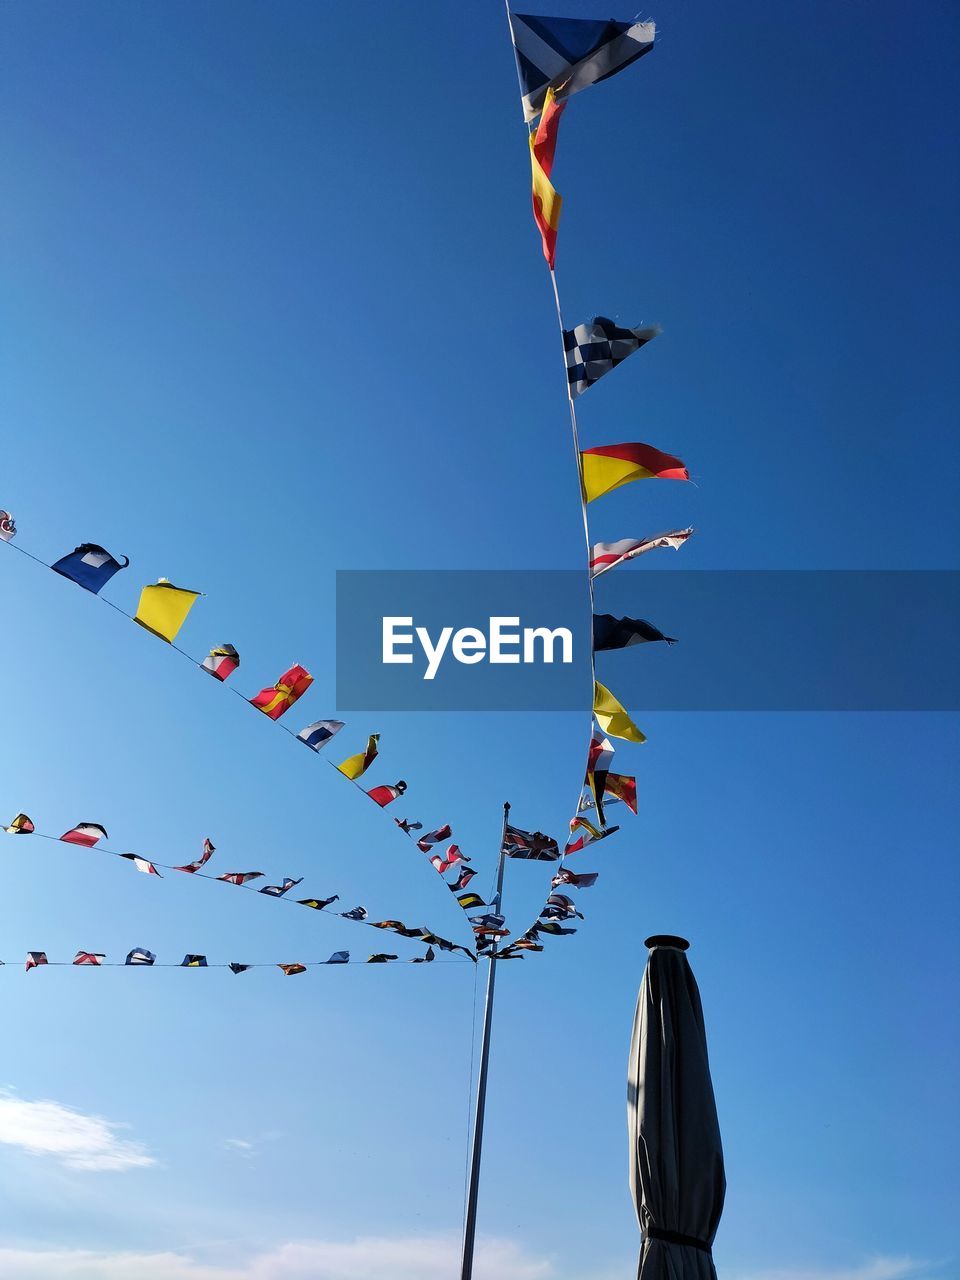 sky, kite sports, nature, flying, kite - toy, toy, windsports, kite, wind, blue, low angle view, celebration, flag, multi colored, sports, tradition, cloud, hanging, day, no people, event, outdoors, environment, in a row, decoration, clear sky, sport kite